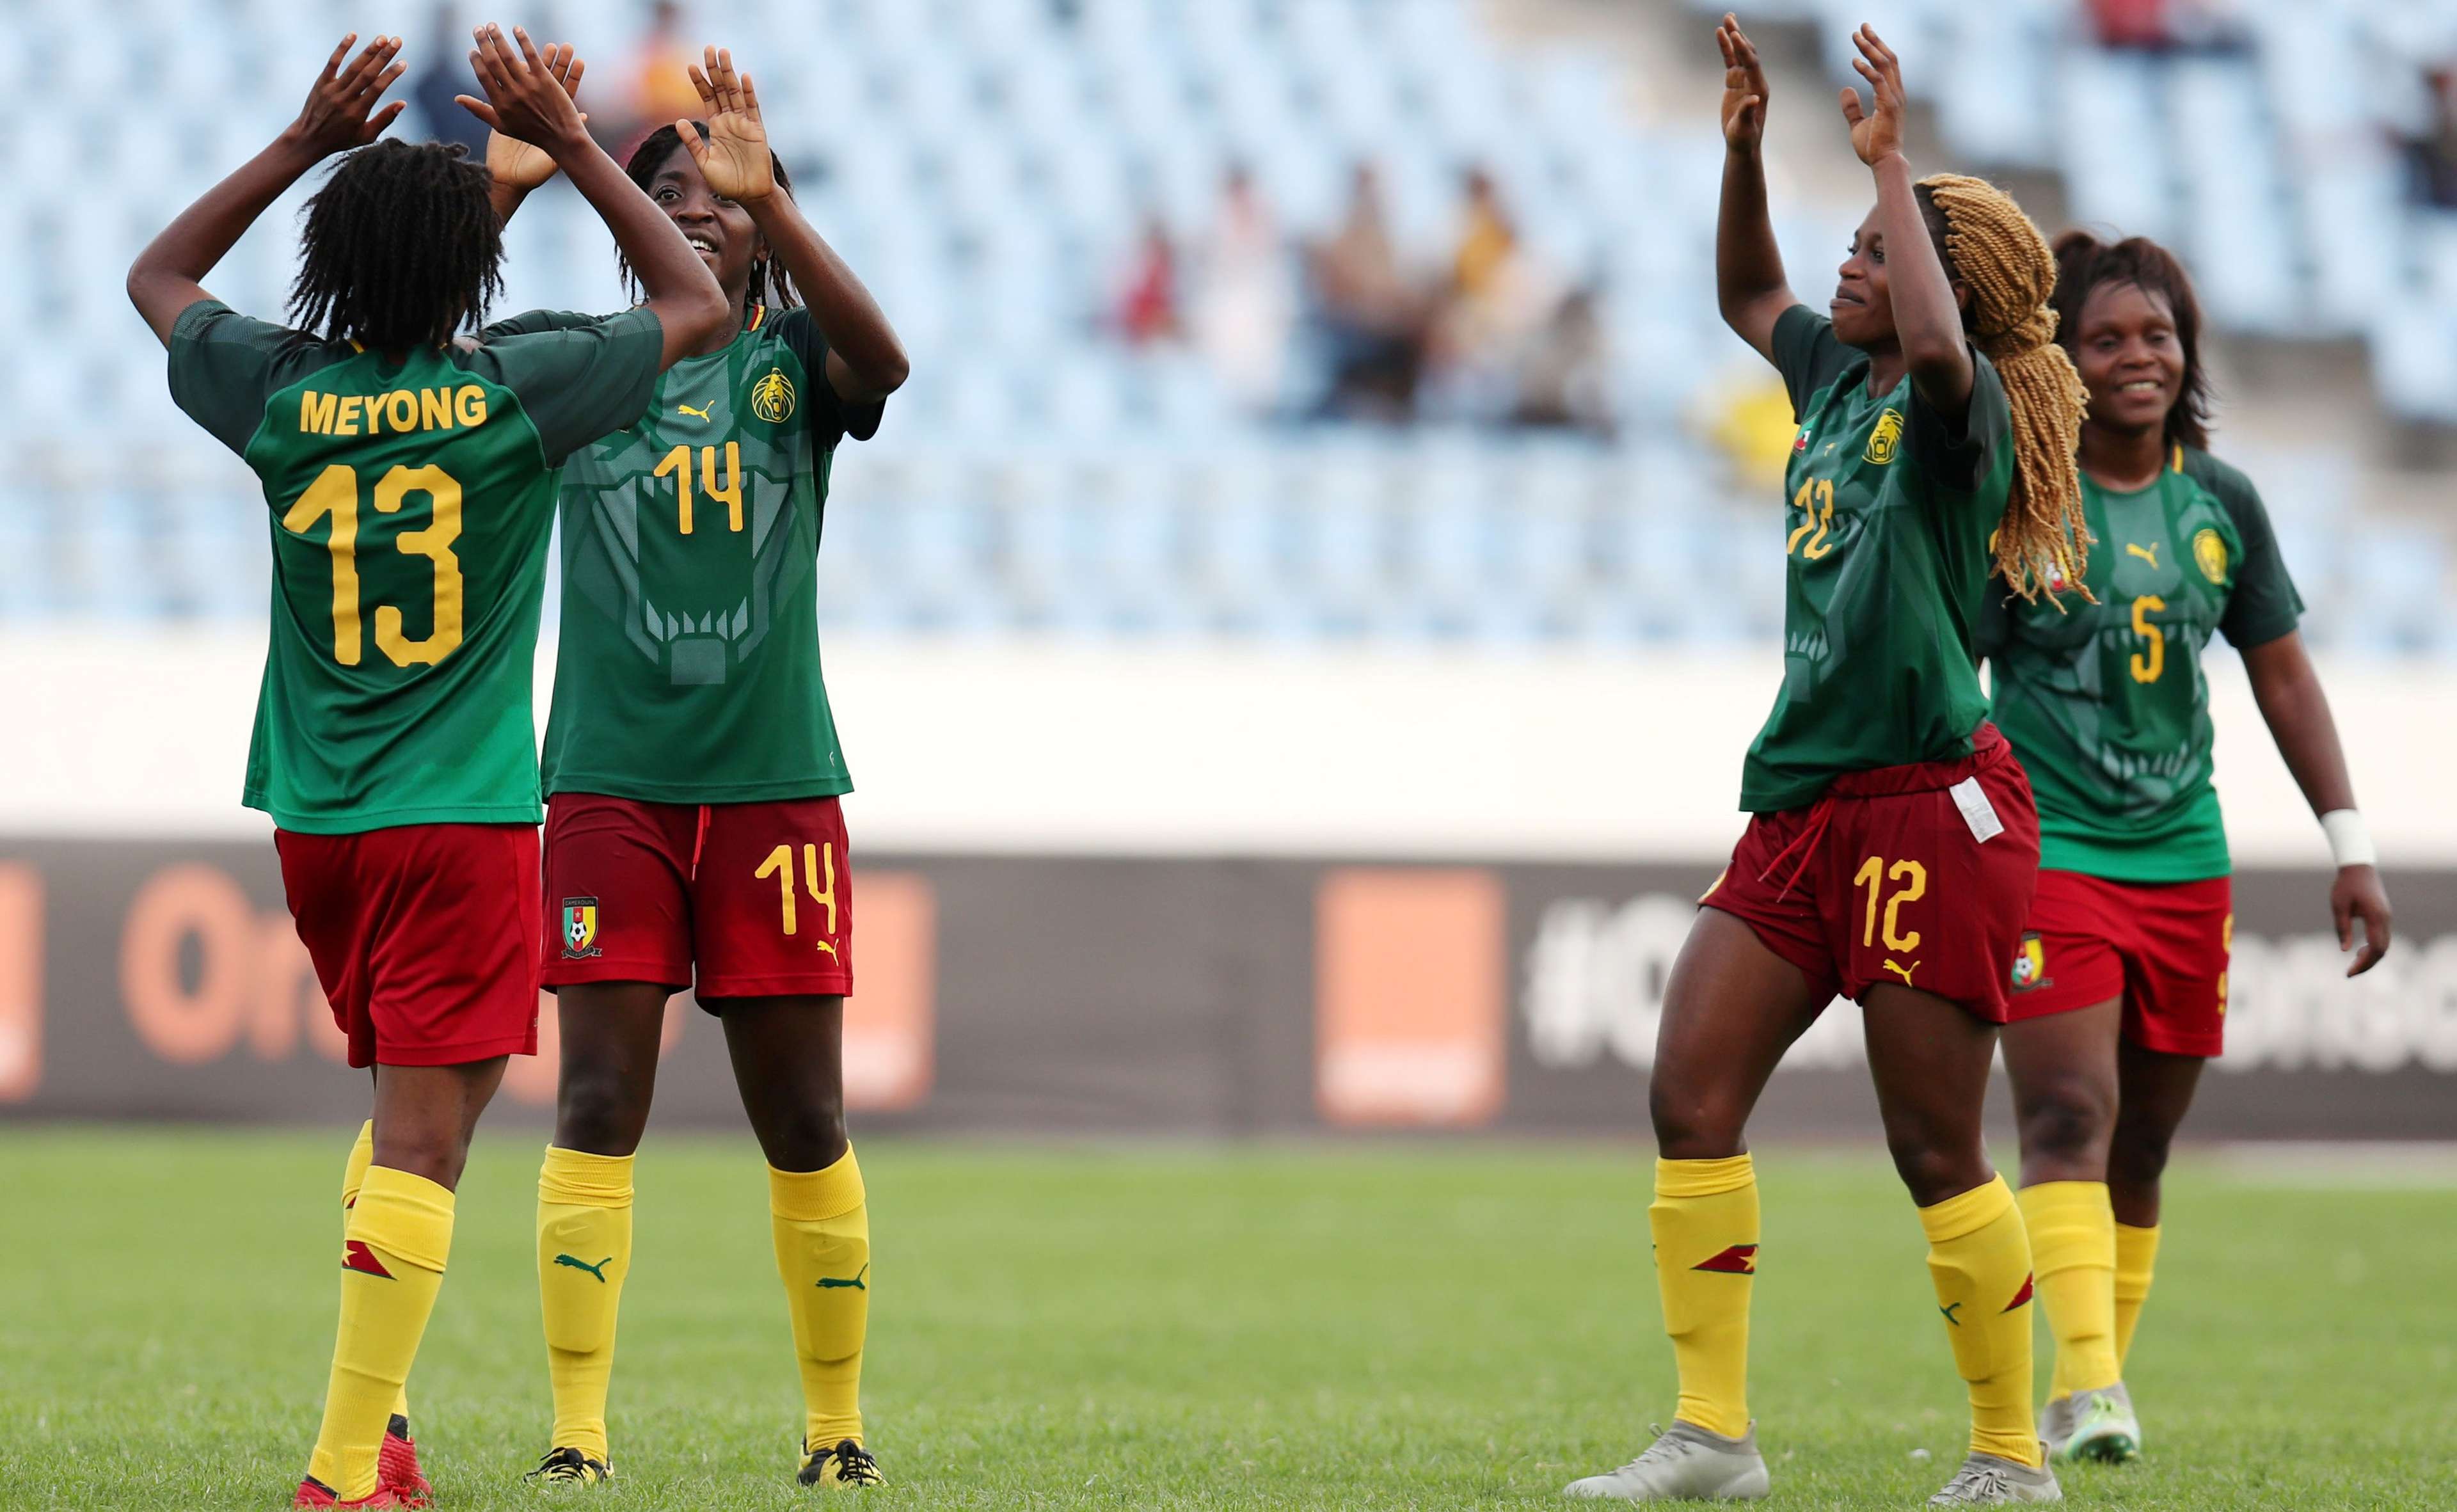 Awcon 2018: Cameroon